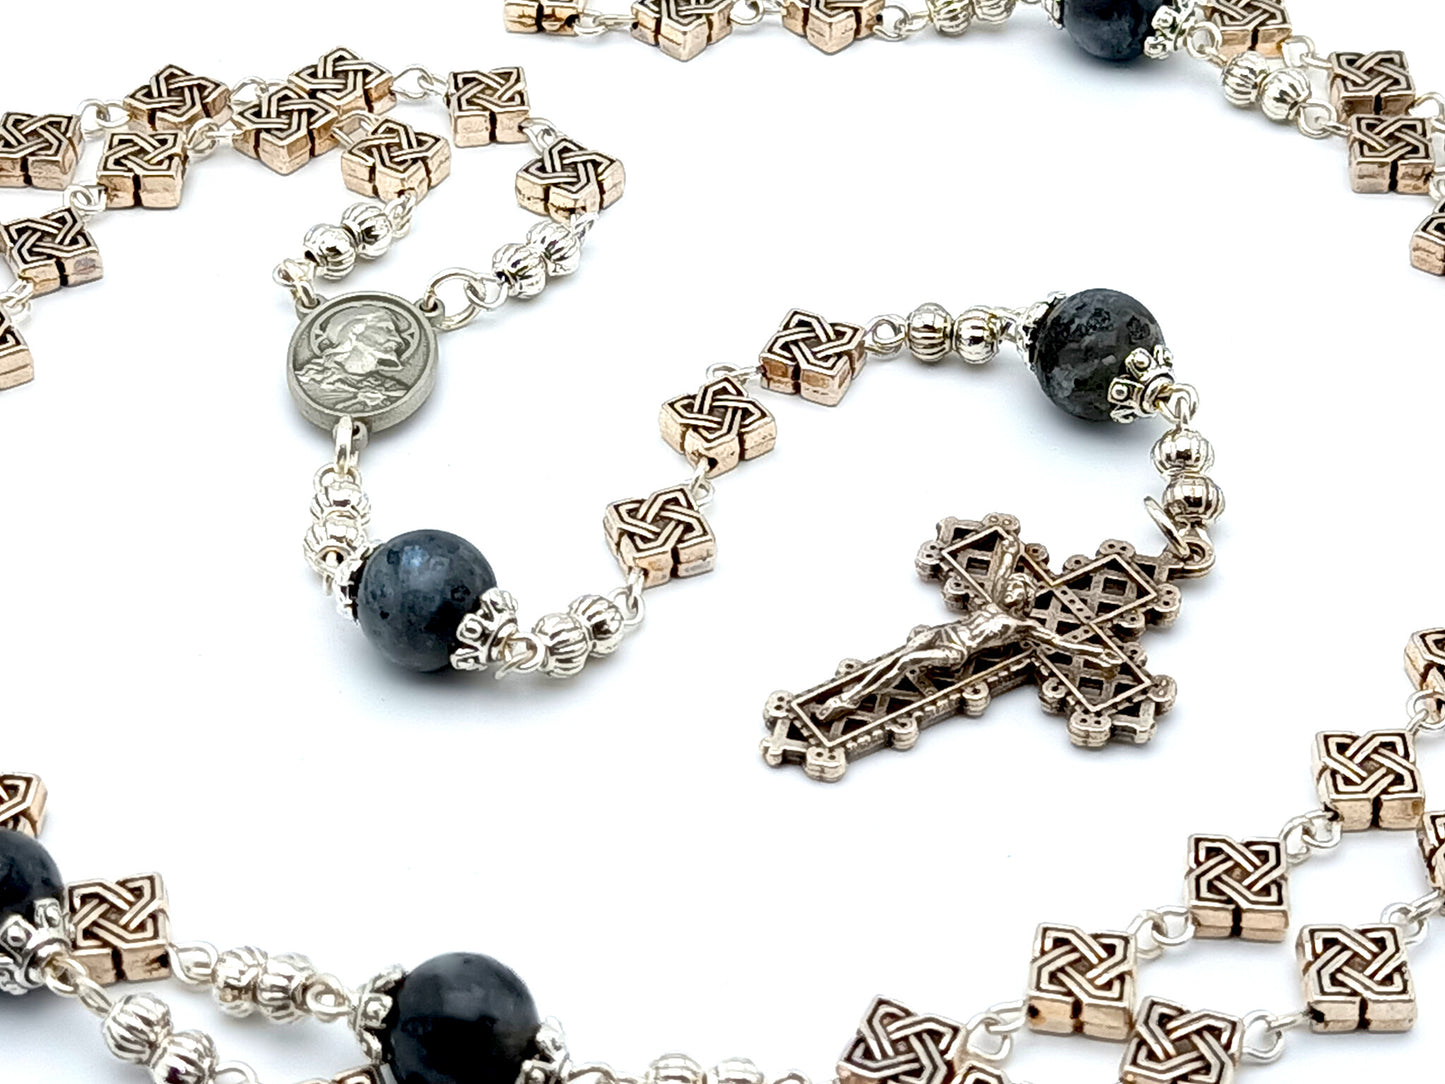 Brown Scapular unique rosary beads with silver Celtic cross and gemstone beads, silver crucifix and centre medal.